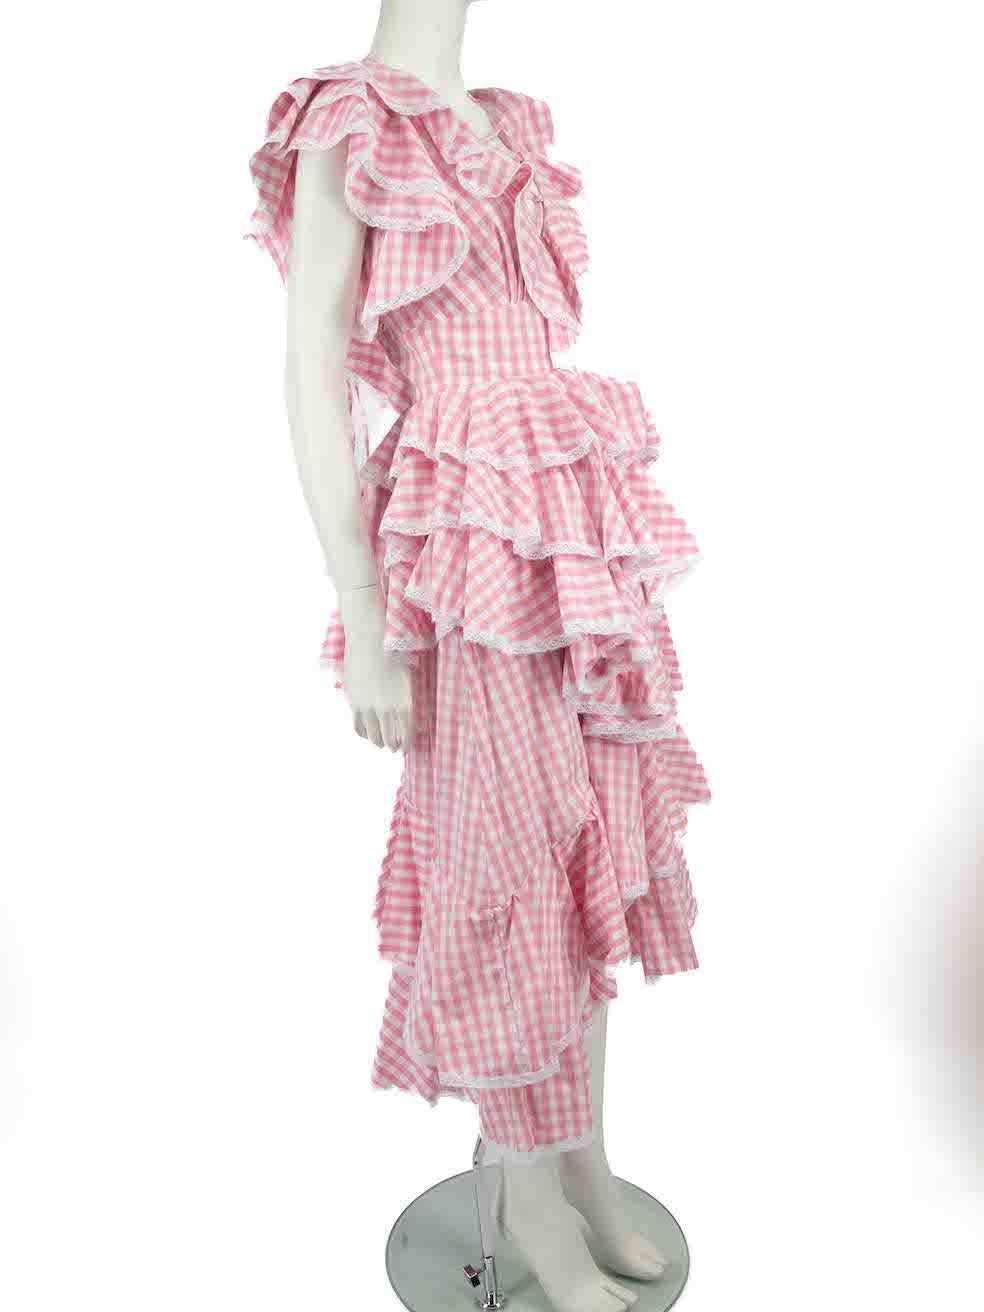 CONDITION is Very good. Minimal wear to dress is evident. Minimal wear to the front lower ruffles and centre-back with plucks and marks to the fabric on this used Milla Milla designer resale item.
 
 Details
 Pink
 Cotton
 Midi dress
 Gingham